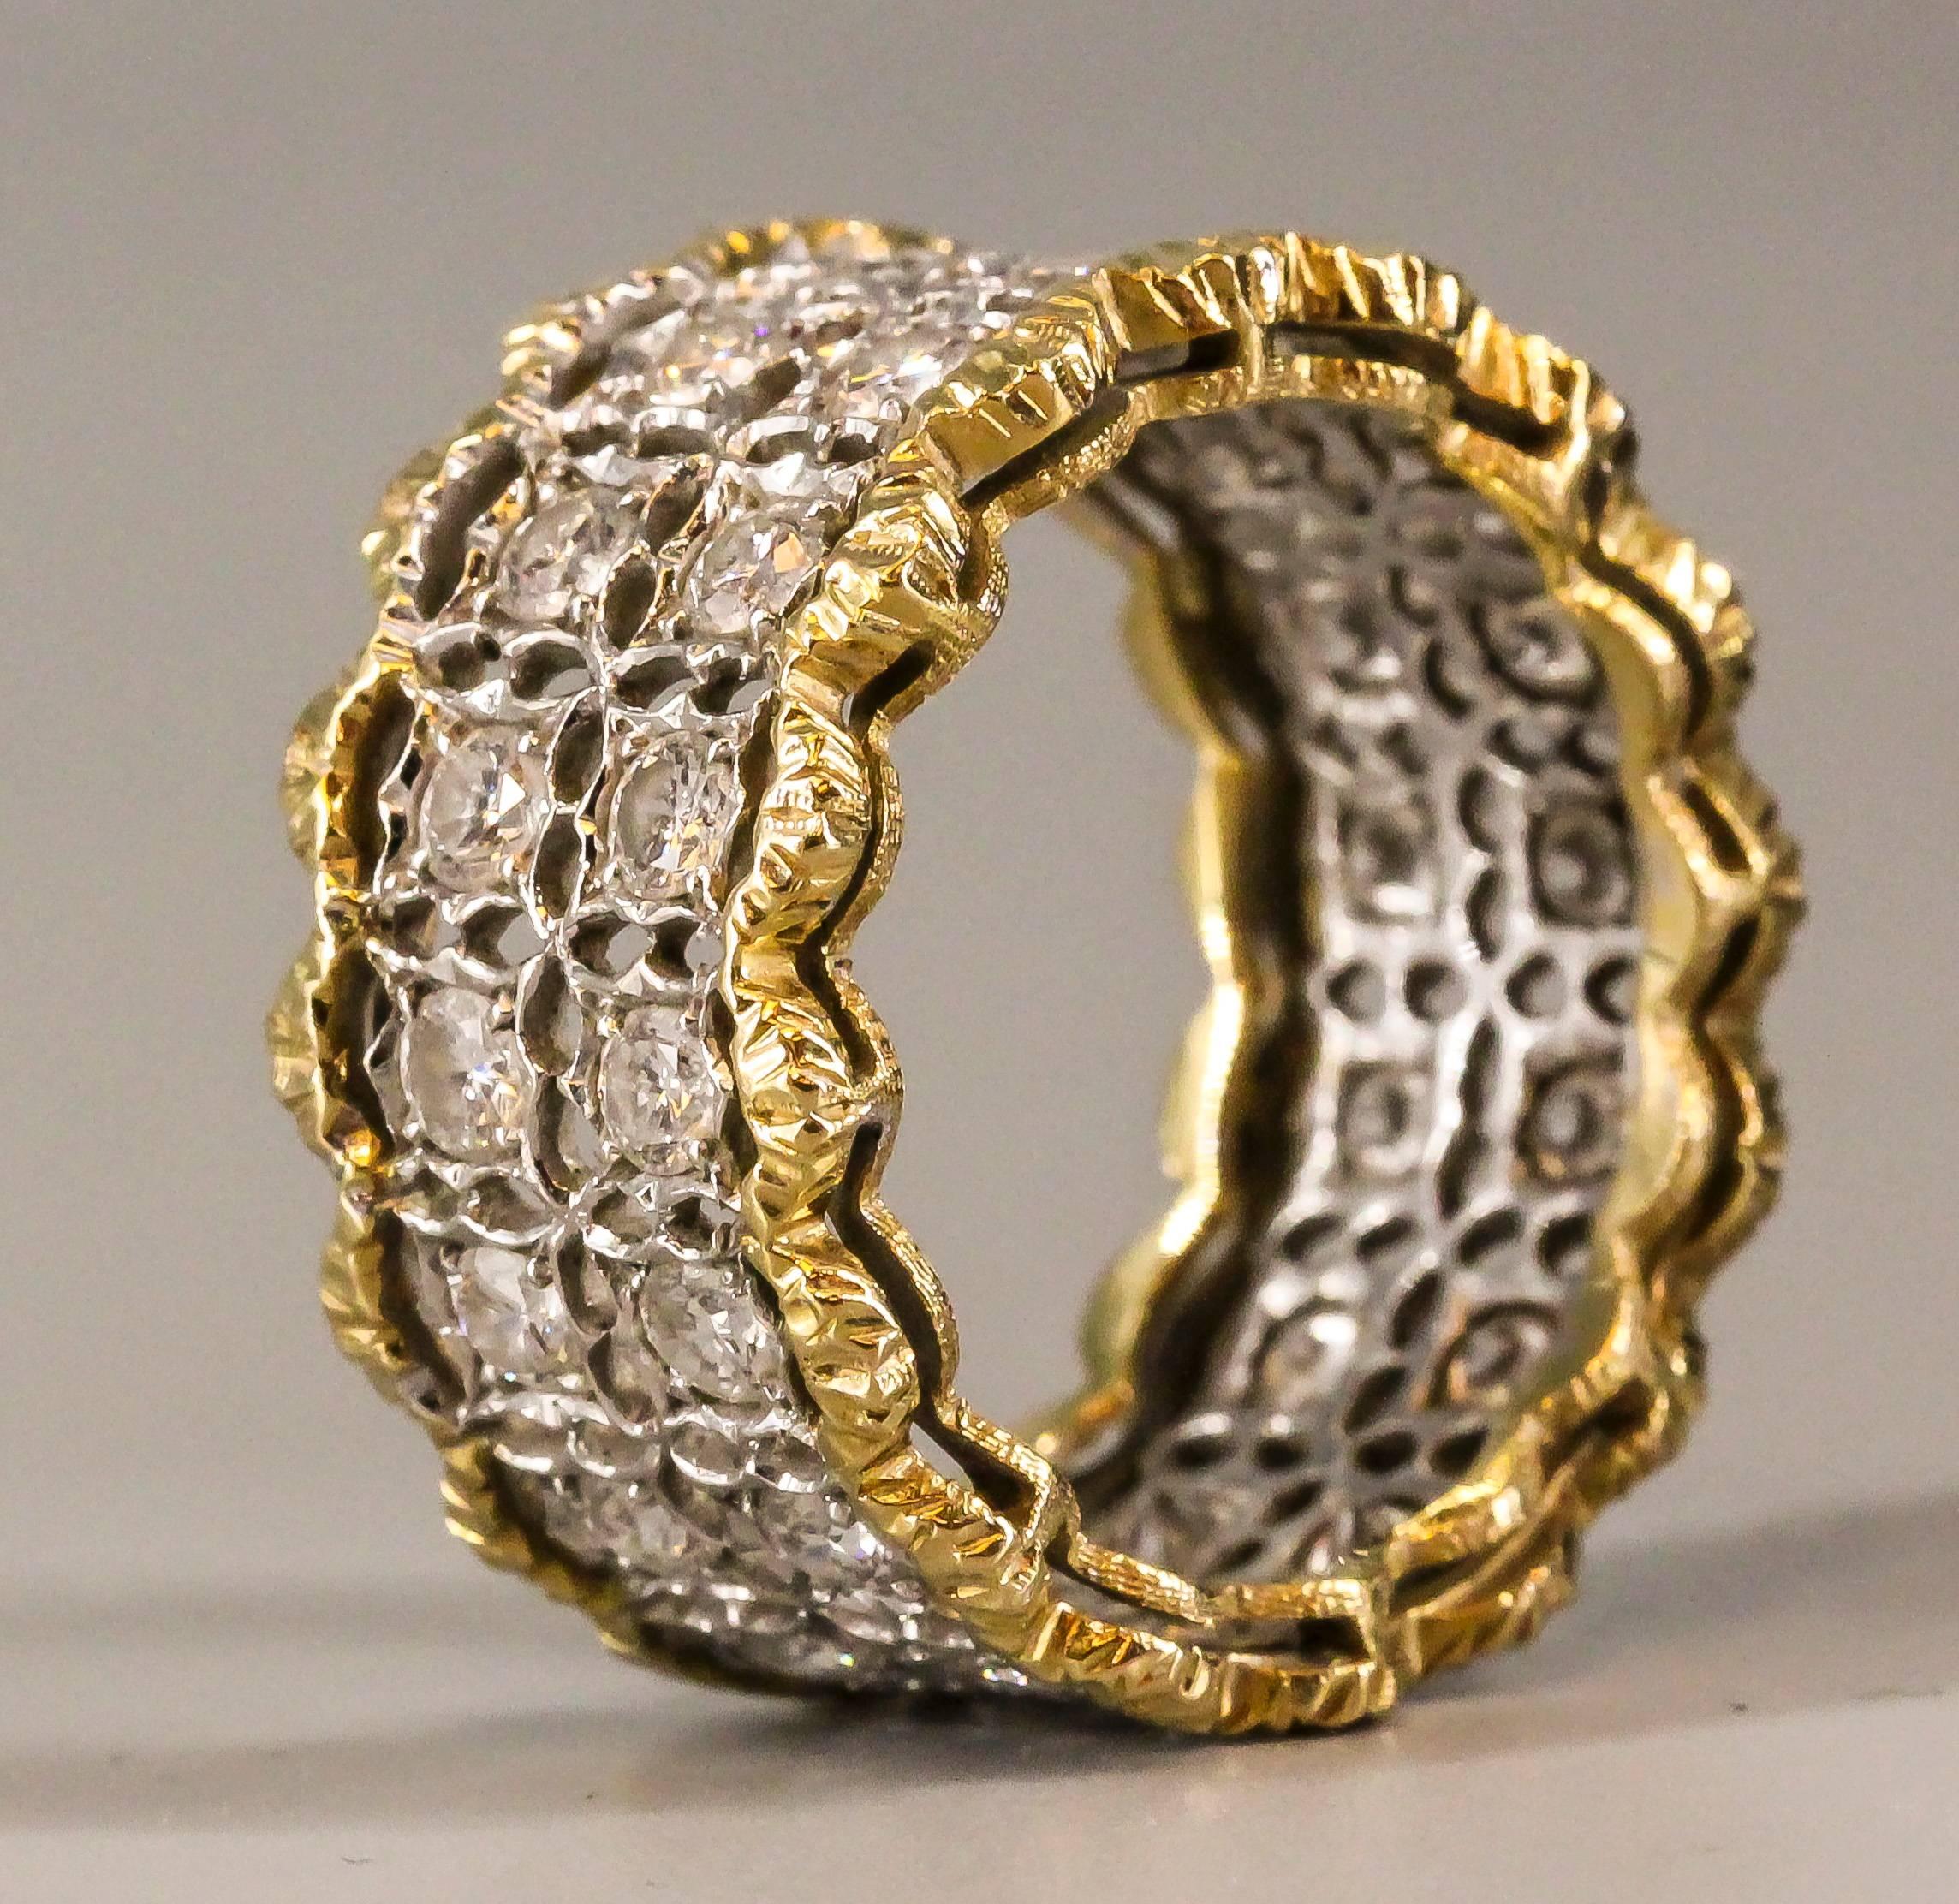 Elegant diamond, platinum and 18K yellow gold wide band by Gianmaria Buccellati. It features high grade round brilliant cut diamonds over a platinum setting, with 18K yellow gold borders on both ends in typical Buccellati fashion. Beautiful